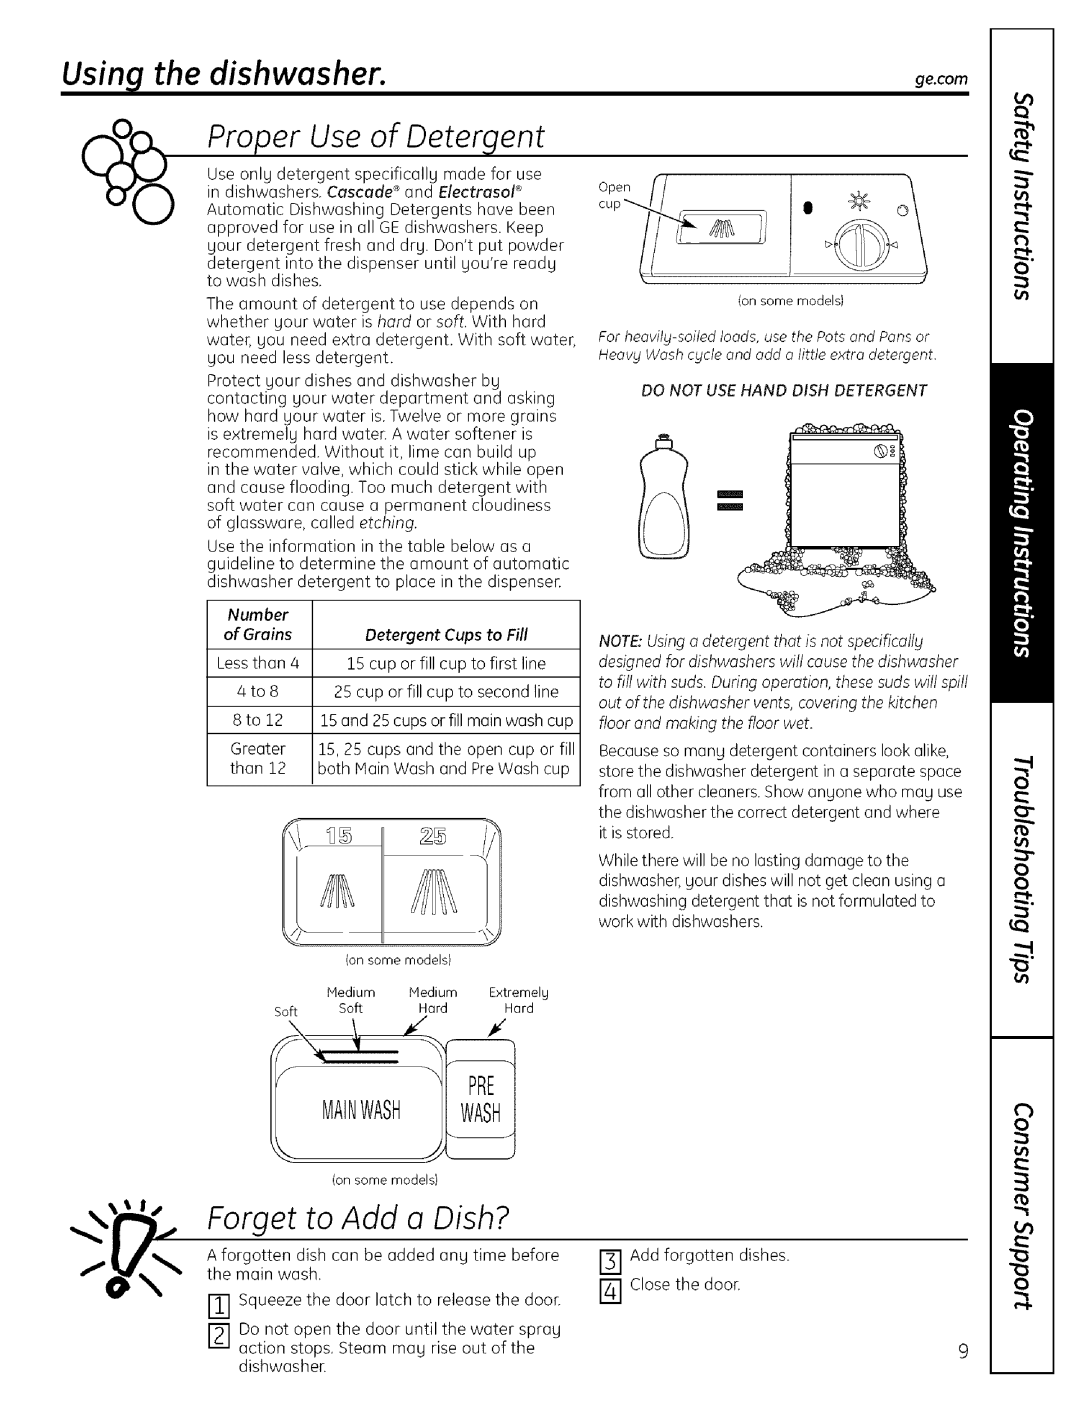 GE EDWSO00 manual Using the dishwasher, gecom, Proper Use of Detergent, Forget to Add o Dish? 